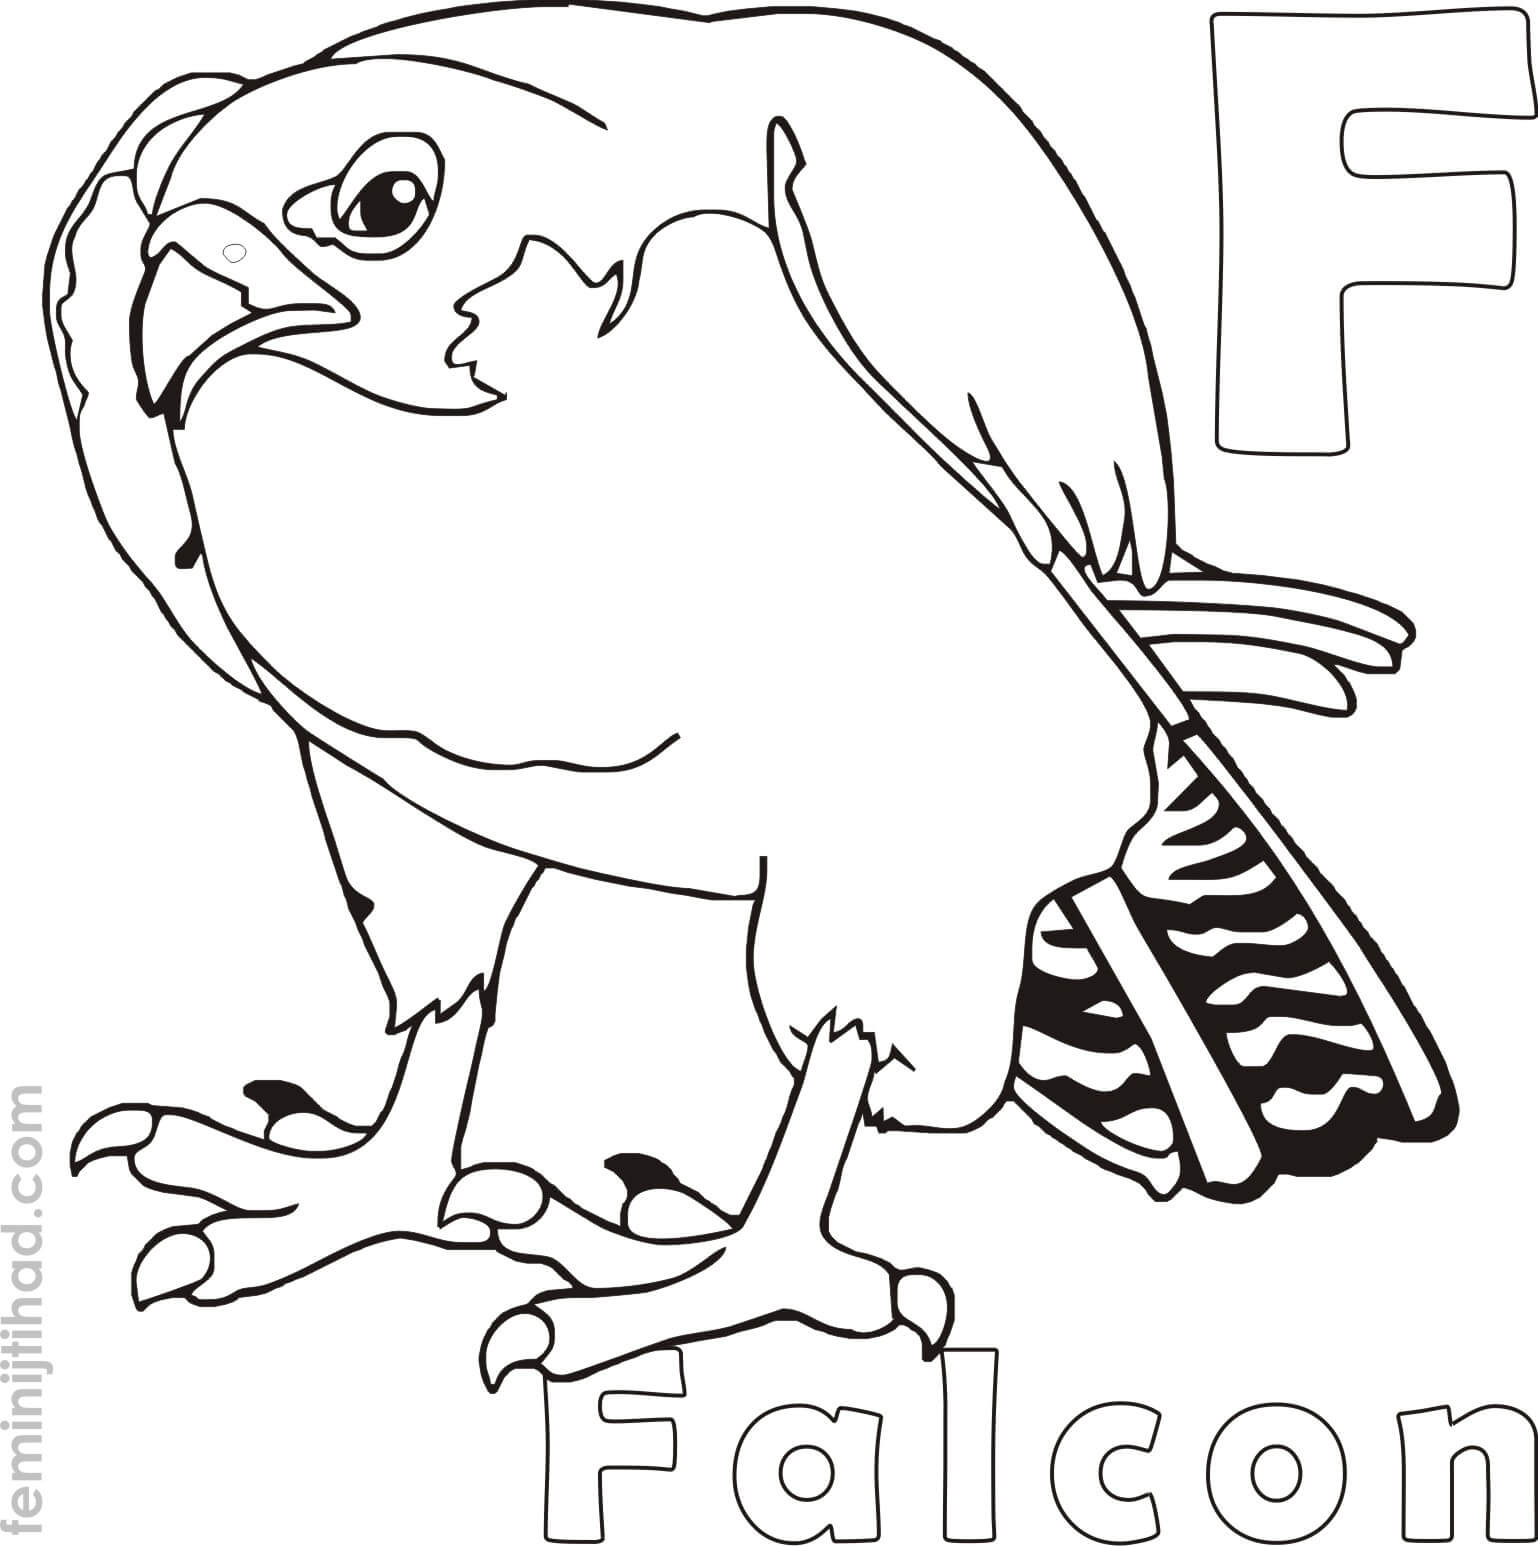 coloring page of falcon